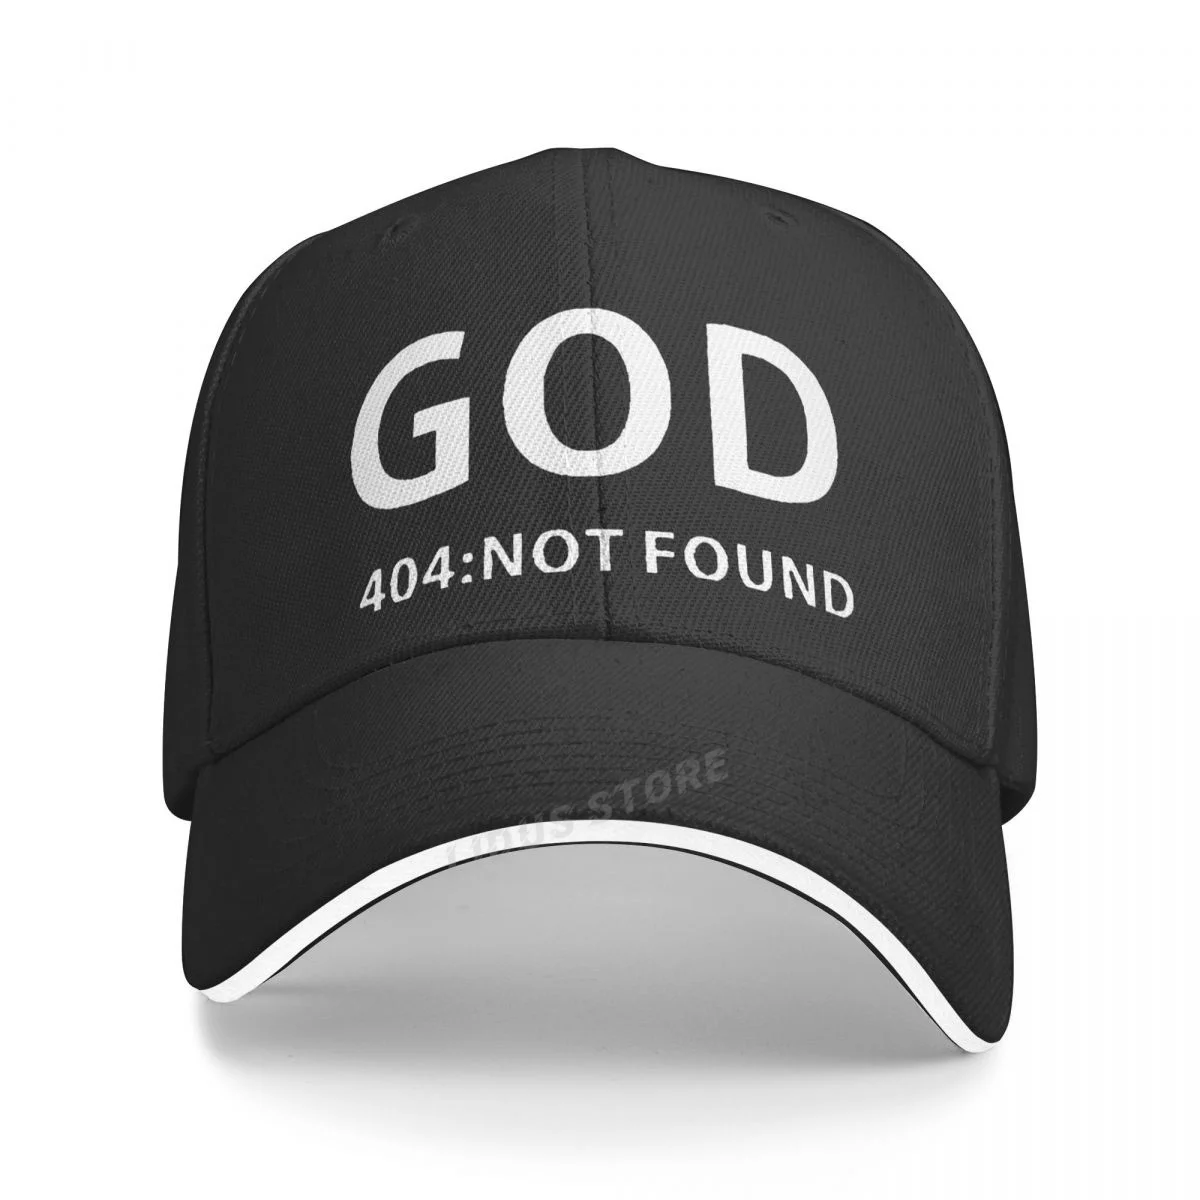 Atheism Religion Atheist Printed Humour Funny Print Baseball Cap God 404 Not Found Letter Men Hat Adjustable Unisex Snapback Hat